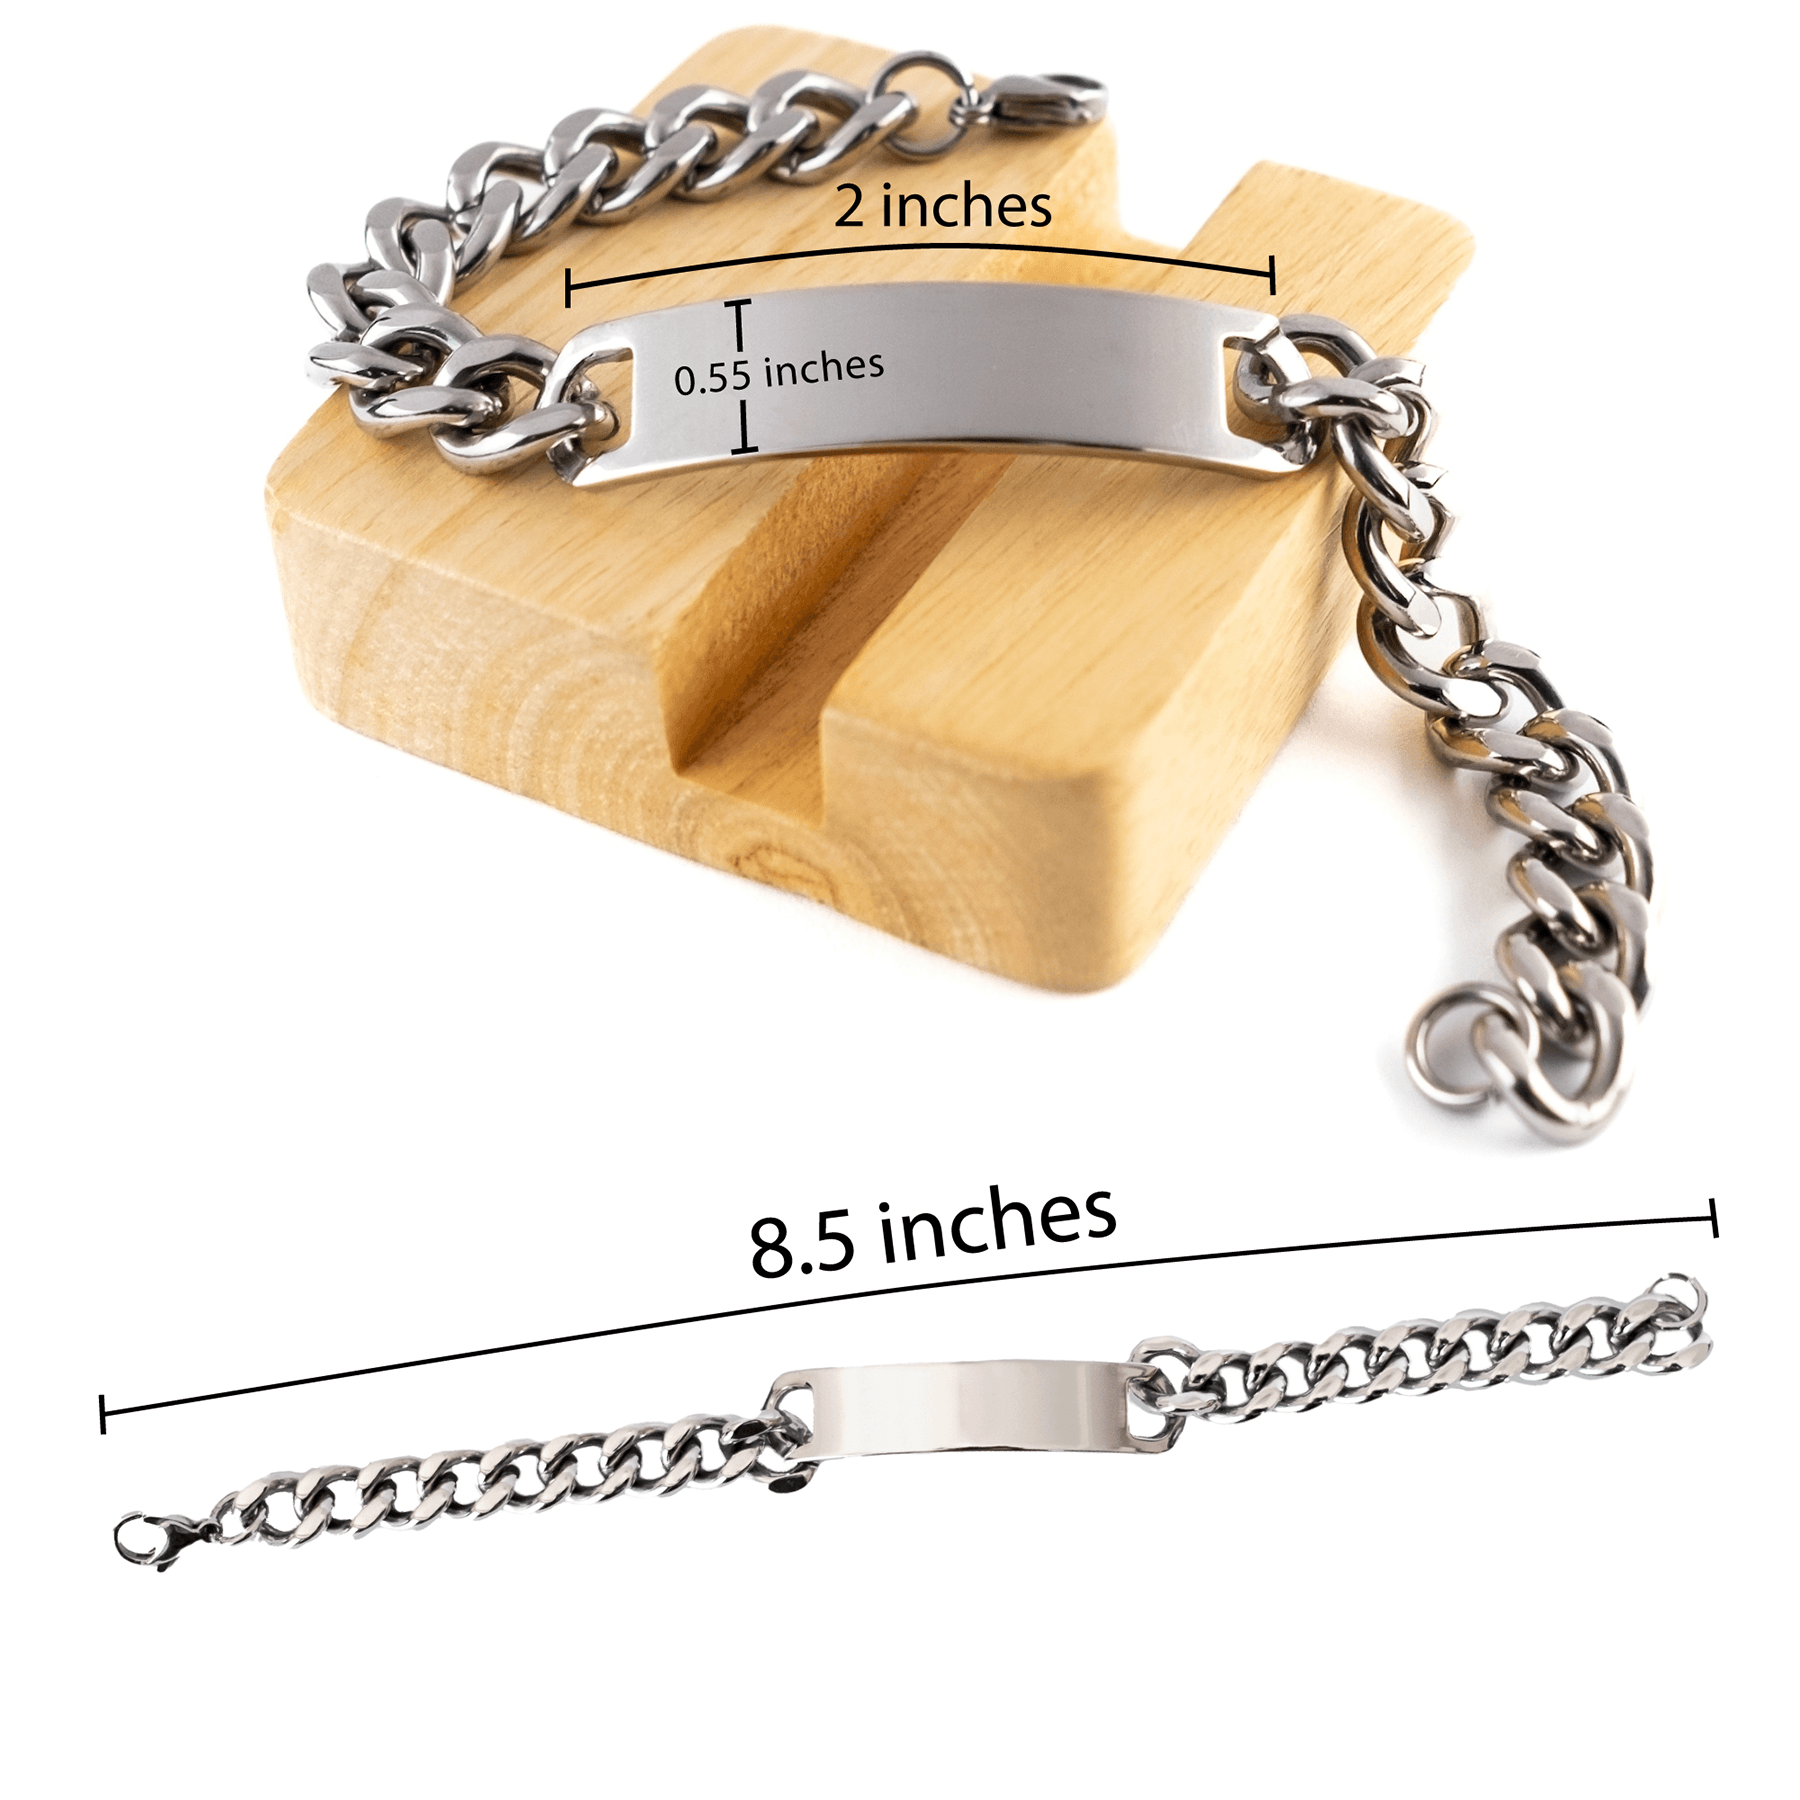 Scientist Cuban Chain Link Engraved Bracelet - Thanks for being who you are - Birthday Christmas Jewelry Gifts Coworkers Colleague Boss - Mallard Moon Gift Shop